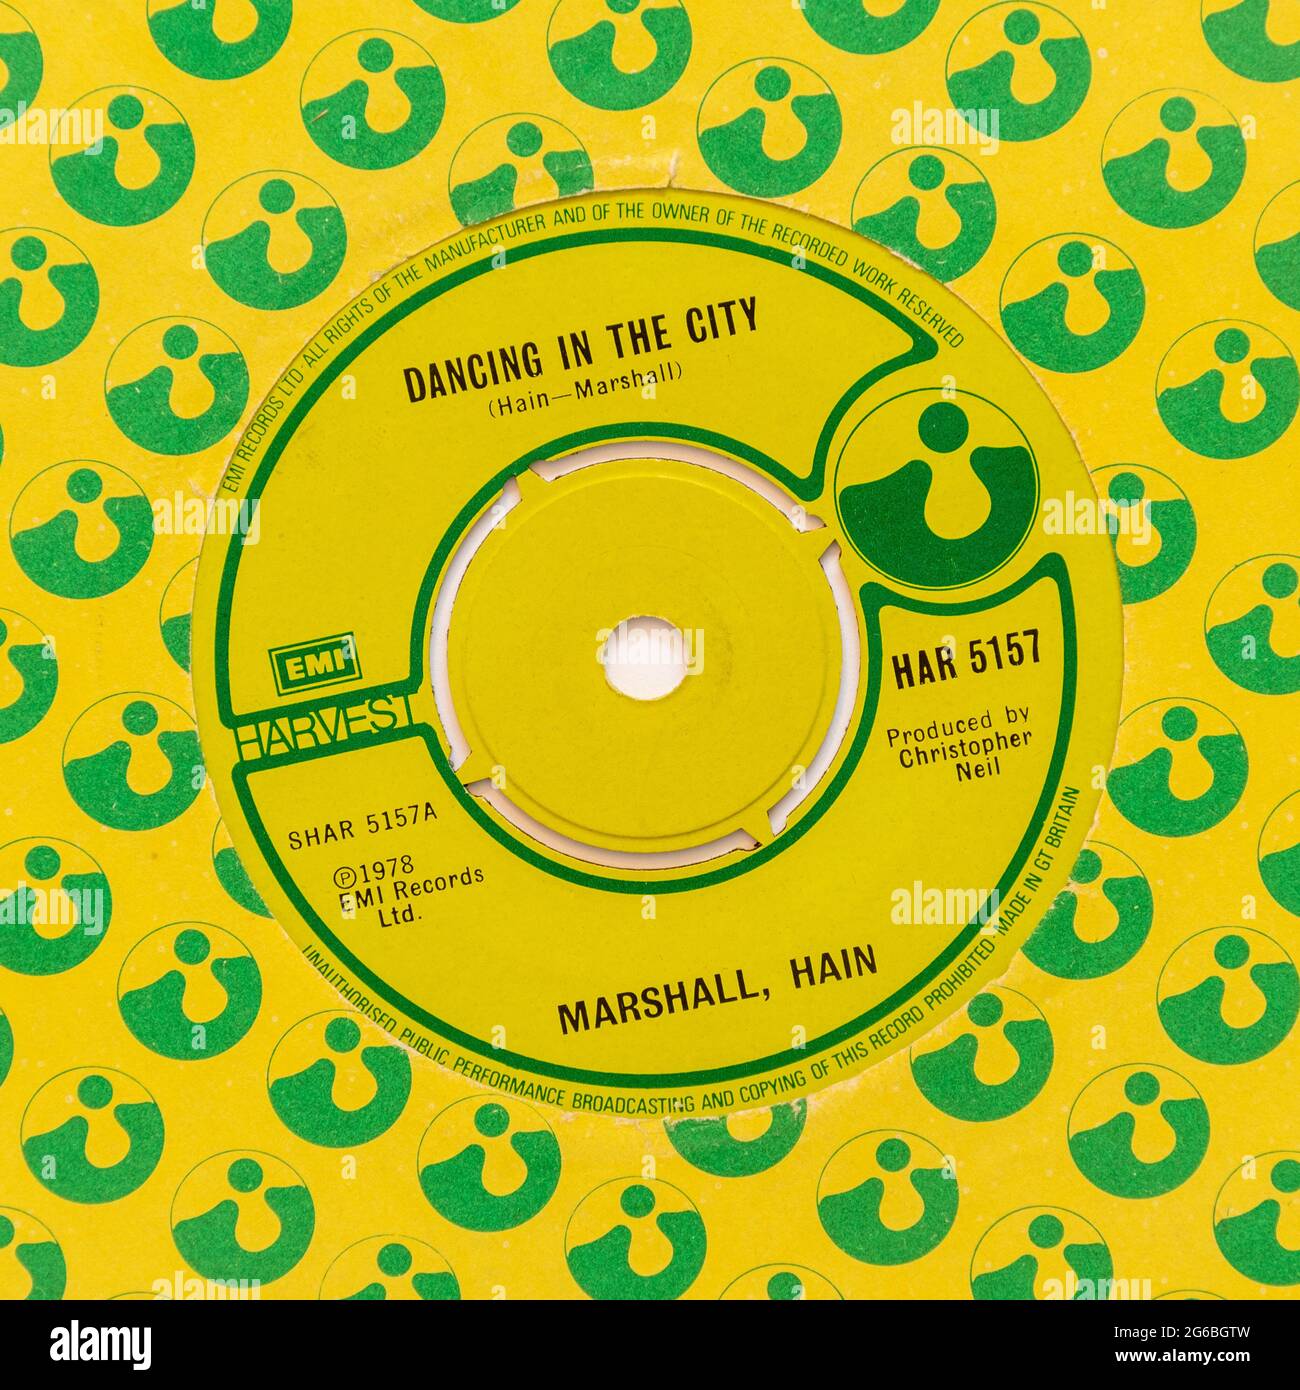 Dancing in the City by Marshall Hain, a stock photo of the 7' single vinyl 45 rpm record in cover Stock Photo